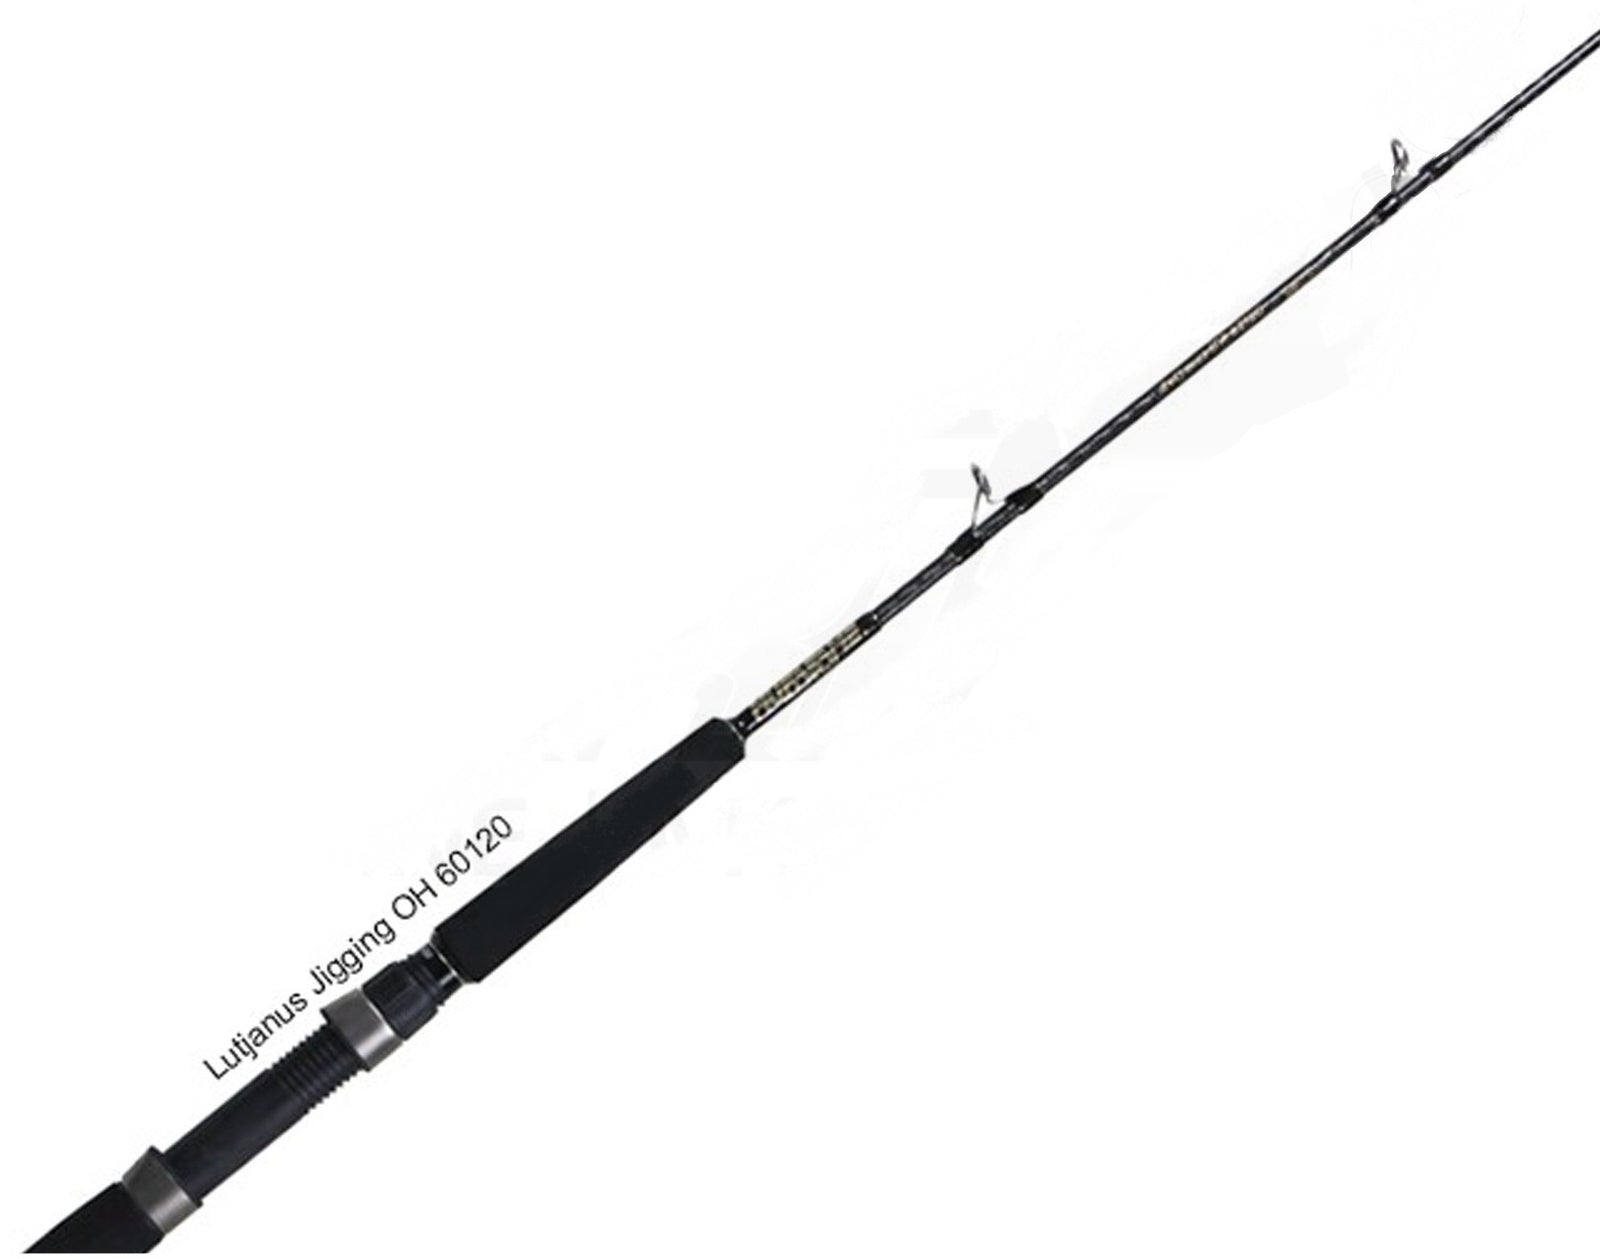 Fishing Rods For Sale - Shop for Spin, Overhead, Baitcast & more Page 14